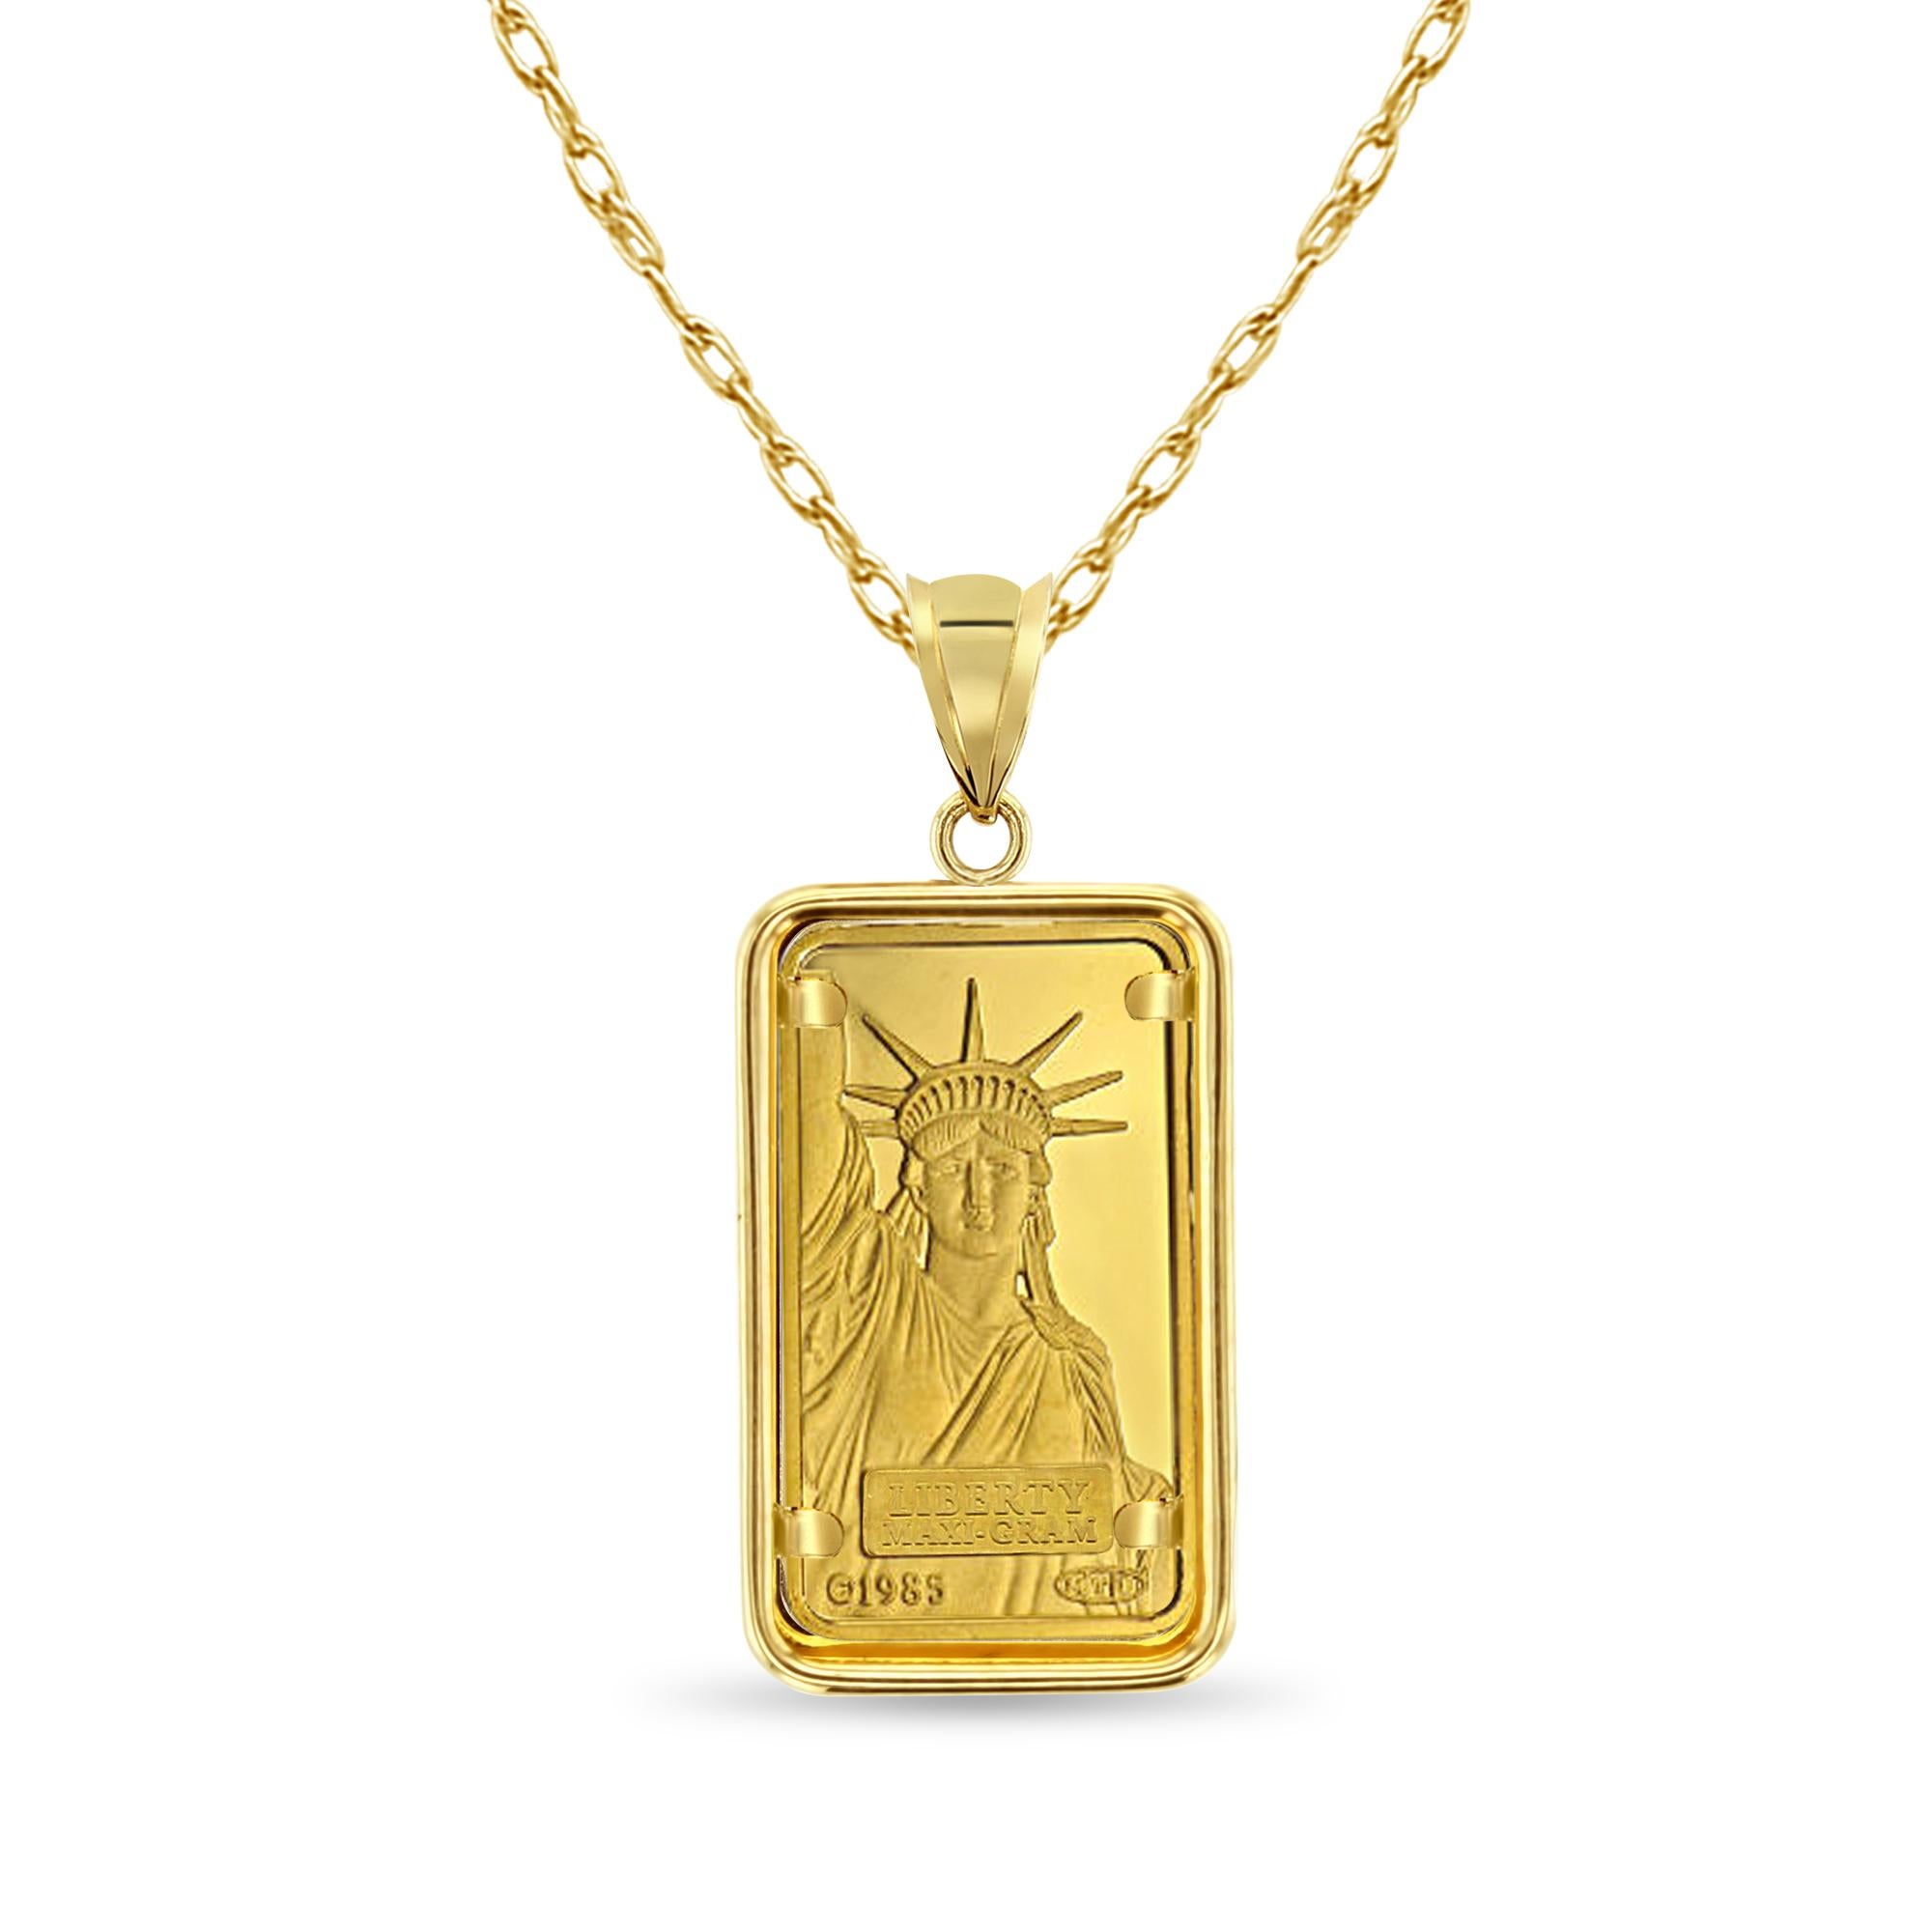 5 Gram Credit Suisse Gold Bar with Polished Bezel Necklace In New Condition For Sale In Sugar Land, TX